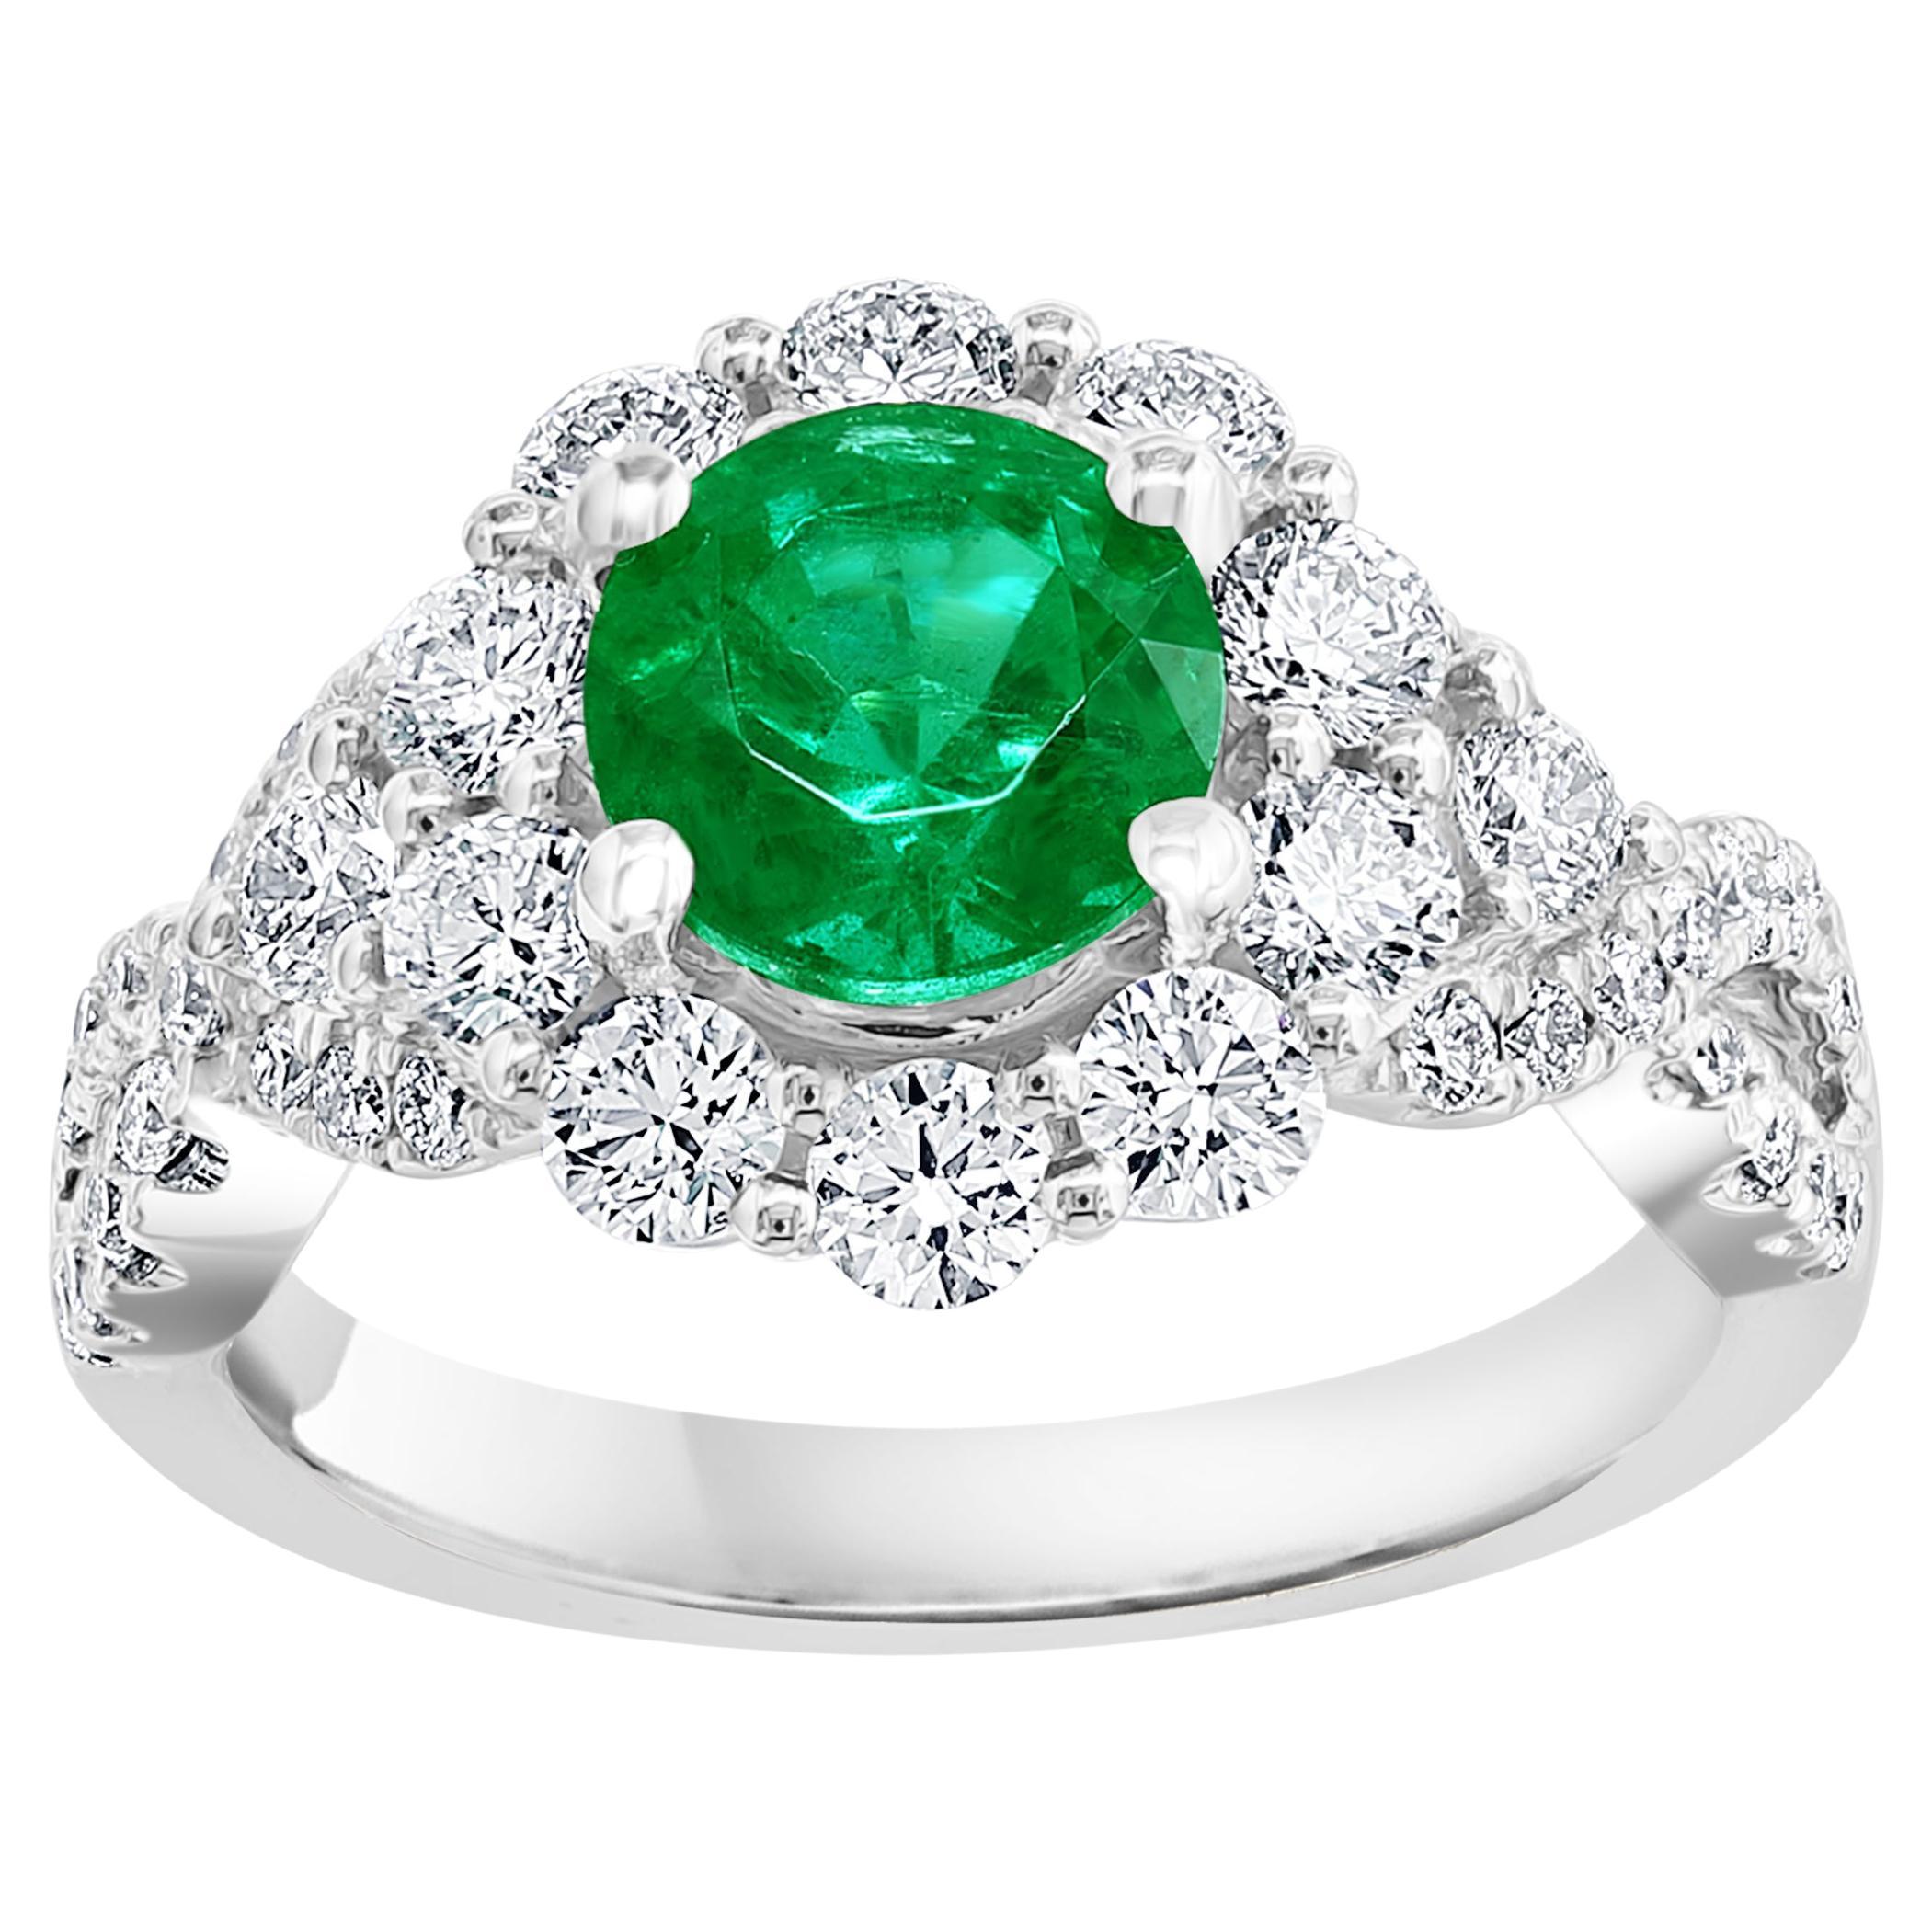 1.30 Carat Round Cut Emerald and Diamond Fashion Ring in 18k White Gold For Sale